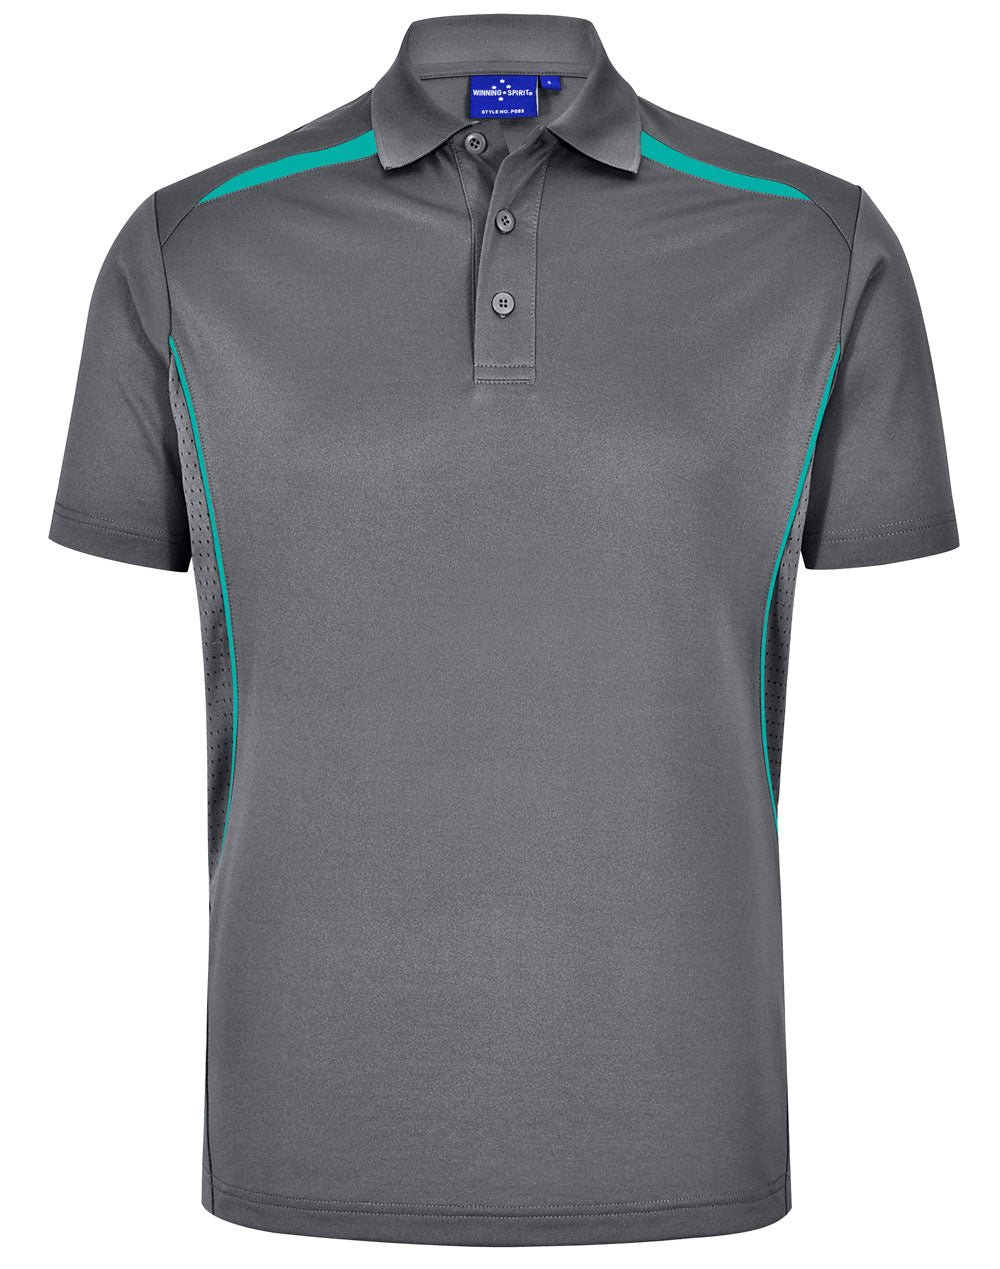 Winning Spirit Men's Sustainable Poly-Cotton Contrast Polo PS93 Casual Wear Winning Spirit Ash/Teal XS 